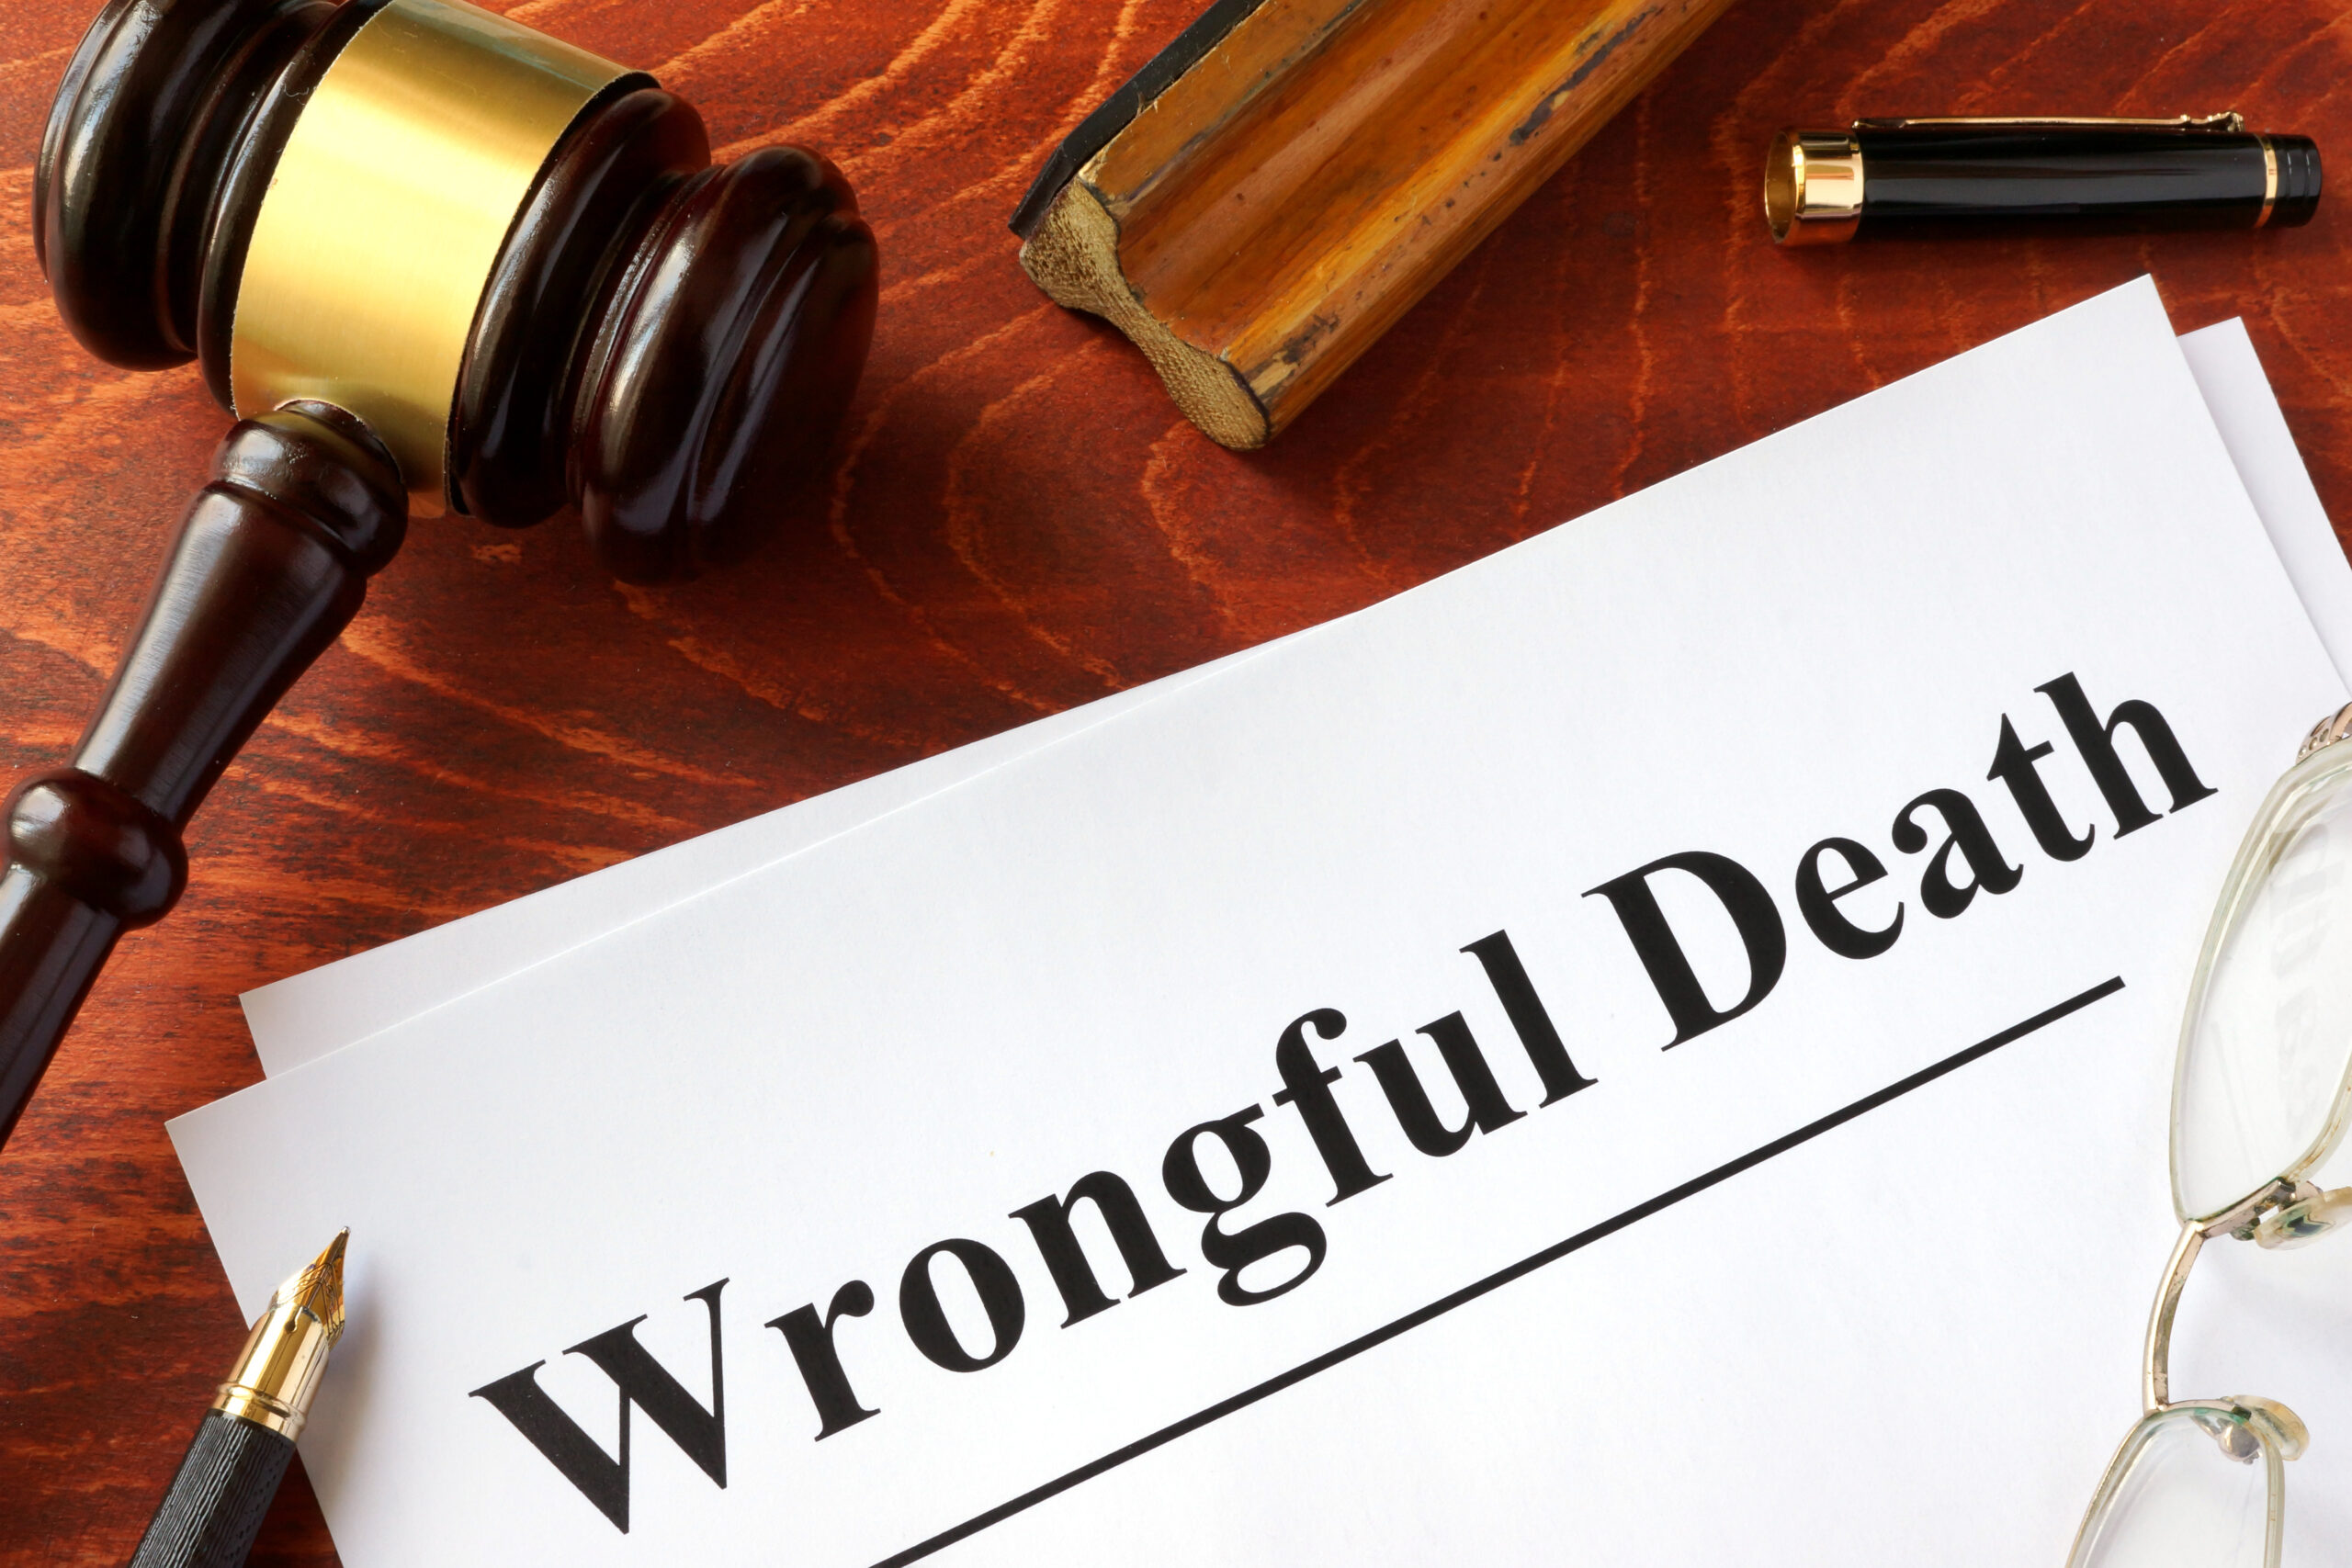 Human Coalition Action Applauds Introduction of Wrongful Death Protection Act